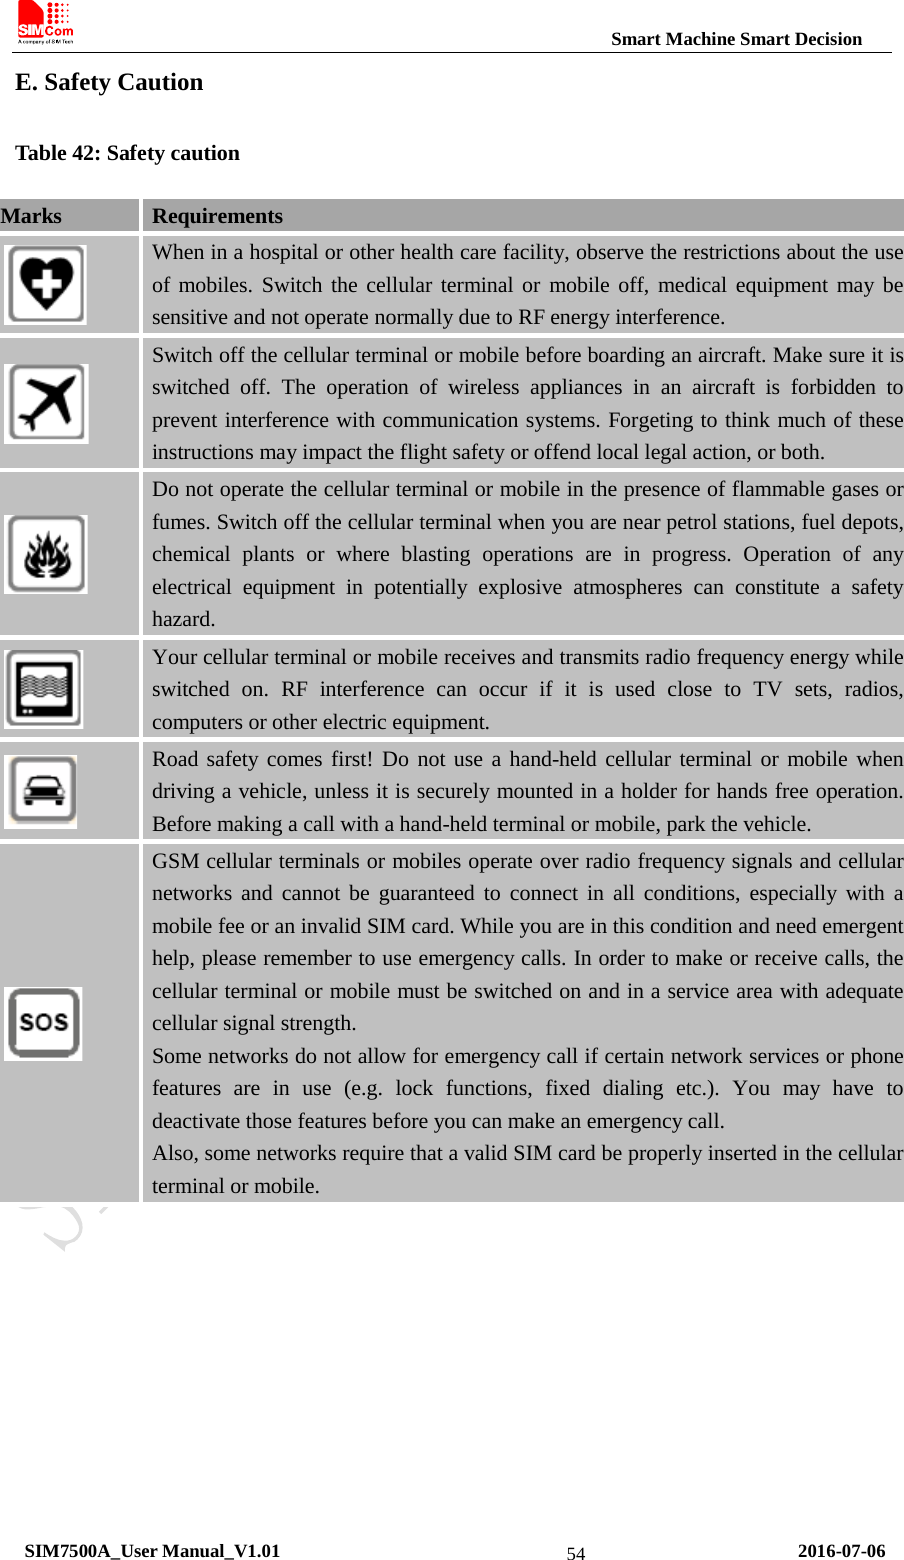                                                          Smart Machine Smart Decision E. Safety Caution Table 42: Safety caution Marks Requirements  When in a hospital or other health care facility, observe the restrictions about the use of mobiles. Switch the cellular terminal or mobile off, medical equipment may be sensitive and not operate normally due to RF energy interference.  Switch off the cellular terminal or mobile before boarding an aircraft. Make sure it is switched off. The operation of wireless appliances in an aircraft is forbidden to prevent interference with communication systems. Forgeting to think much of these instructions may impact the flight safety or offend local legal action, or both.  Do not operate the cellular terminal or mobile in the presence of flammable gases or fumes. Switch off the cellular terminal when you are near petrol stations, fuel depots, chemical plants or where blasting operations are in progress. Operation of any electrical equipment in potentially explosive atmospheres can constitute a safety hazard.  Your cellular terminal or mobile receives and transmits radio frequency energy while switched on. RF interference can occur if it is used close to TV sets, radios, computers or other electric equipment.  Road safety comes first! Do not use a hand-held cellular terminal or mobile when driving a vehicle, unless it is securely mounted in a holder for hands free operation. Before making a call with a hand-held terminal or mobile, park the vehicle.  GSM cellular terminals or mobiles operate over radio frequency signals and cellular networks and cannot be guaranteed to connect in all conditions, especially with a mobile fee or an invalid SIM card. While you are in this condition and need emergent help, please remember to use emergency calls. In order to make or receive calls, the cellular terminal or mobile must be switched on and in a service area with adequate cellular signal strength. Some networks do not allow for emergency call if certain network services or phone features are in use (e.g. lock functions, fixed dialing etc.). You may have to deactivate those features before you can make an emergency call. Also, some networks require that a valid SIM card be properly inserted in the cellular terminal or mobile.  SIM7500A_User Manual_V1.01                                                       2016-07-06 54 